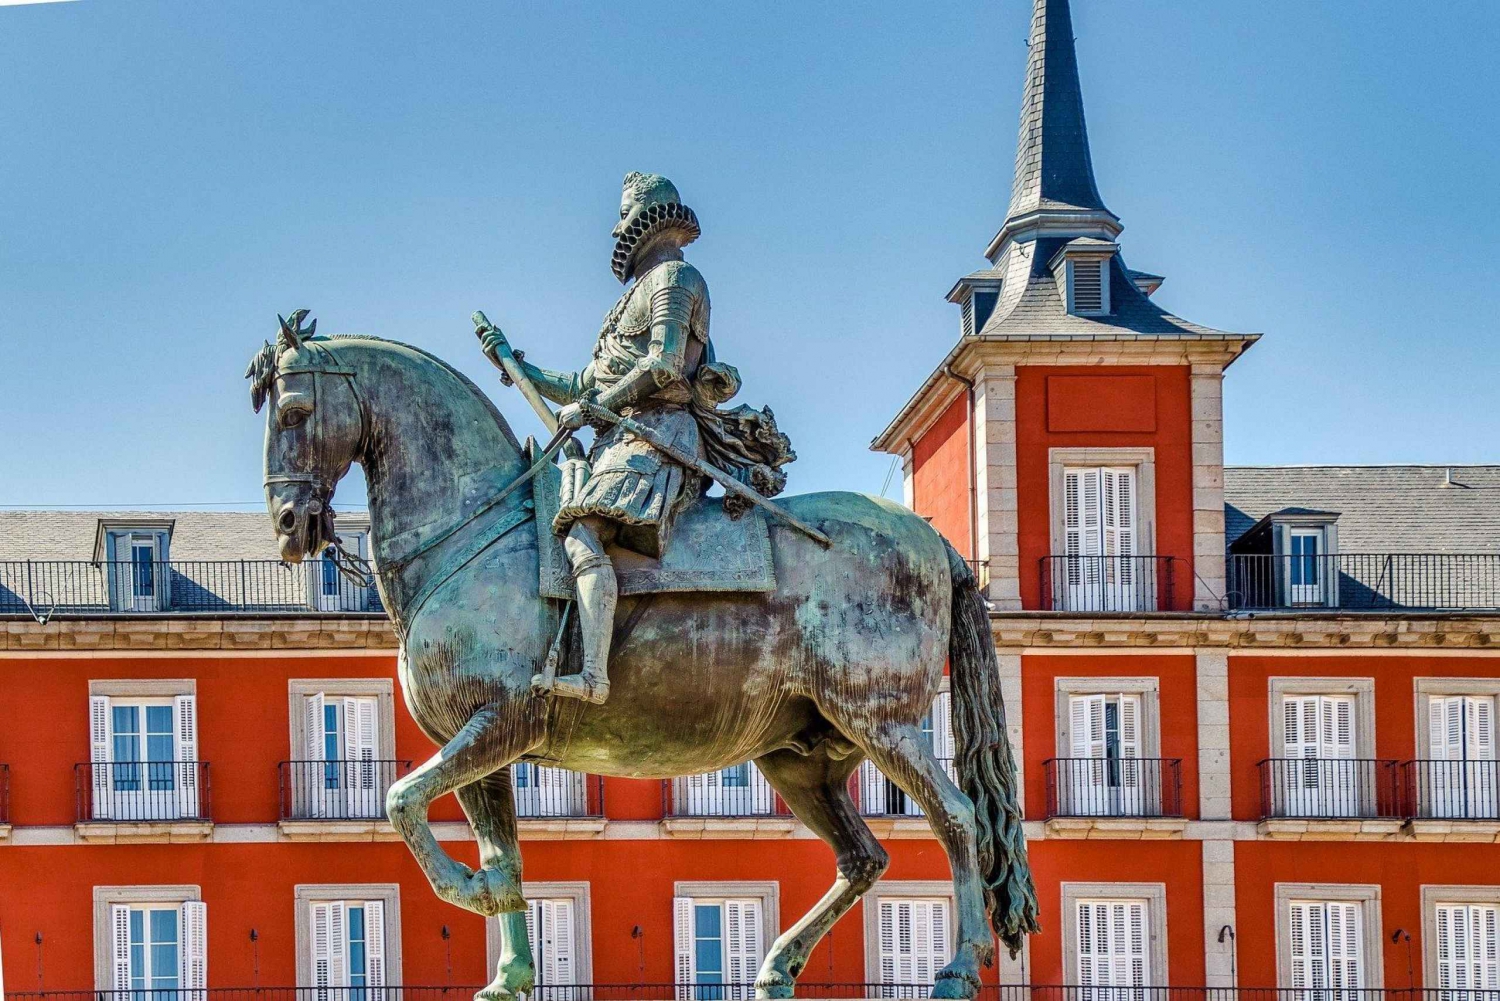 Madrid: Habsburg and Palace Tour with Language Options